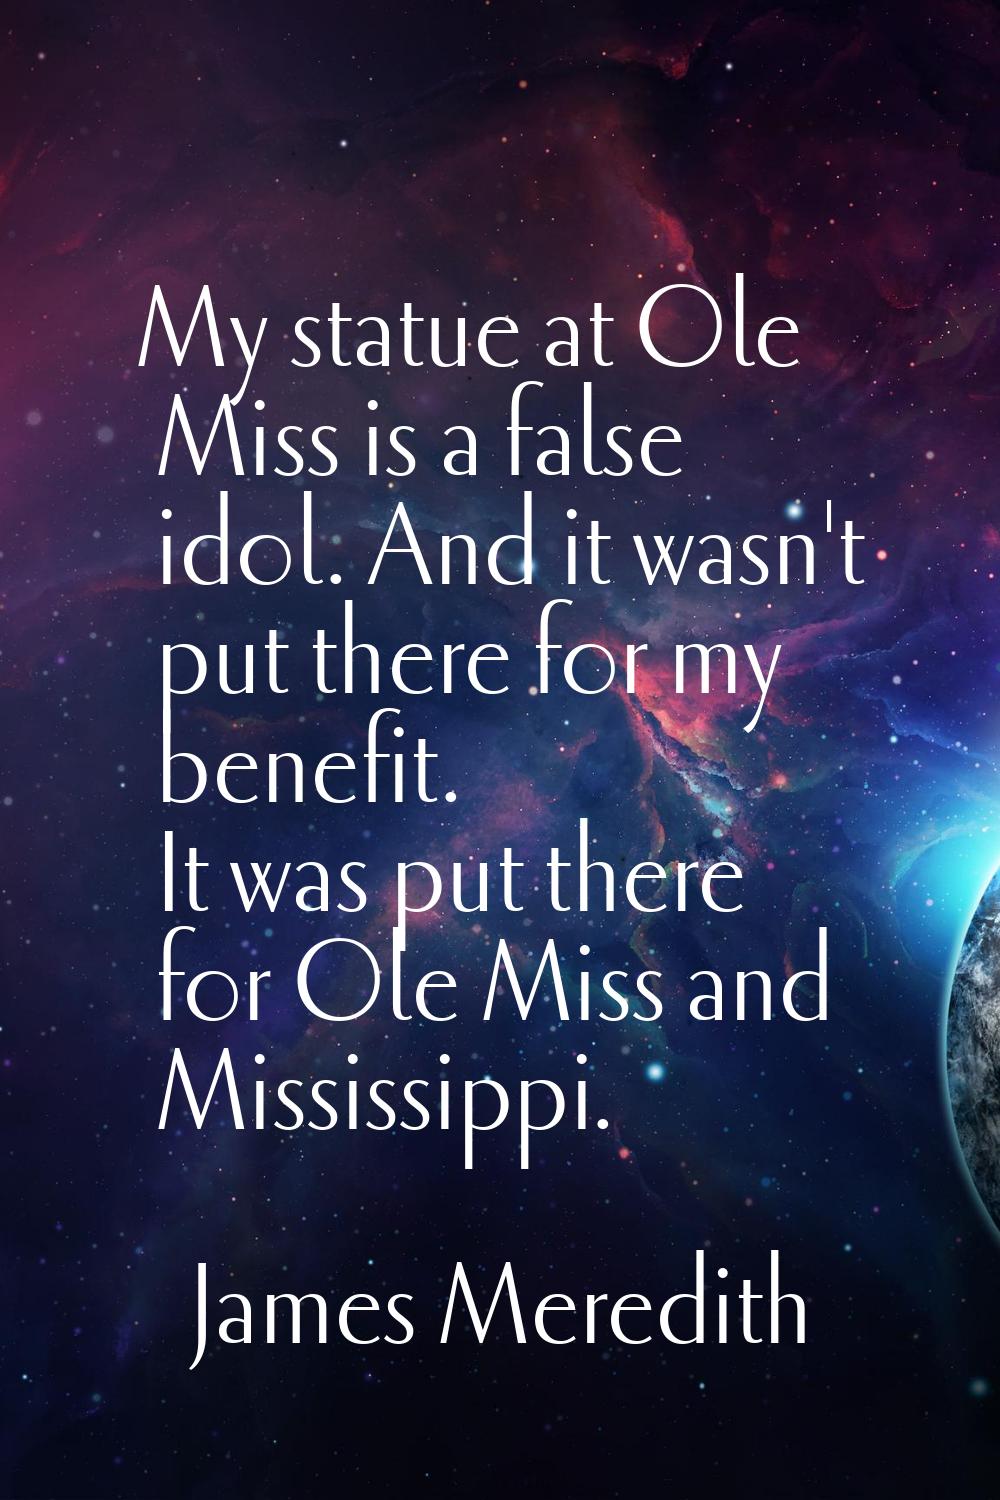 My statue at Ole Miss is a false idol. And it wasn't put there for my benefit. It was put there for